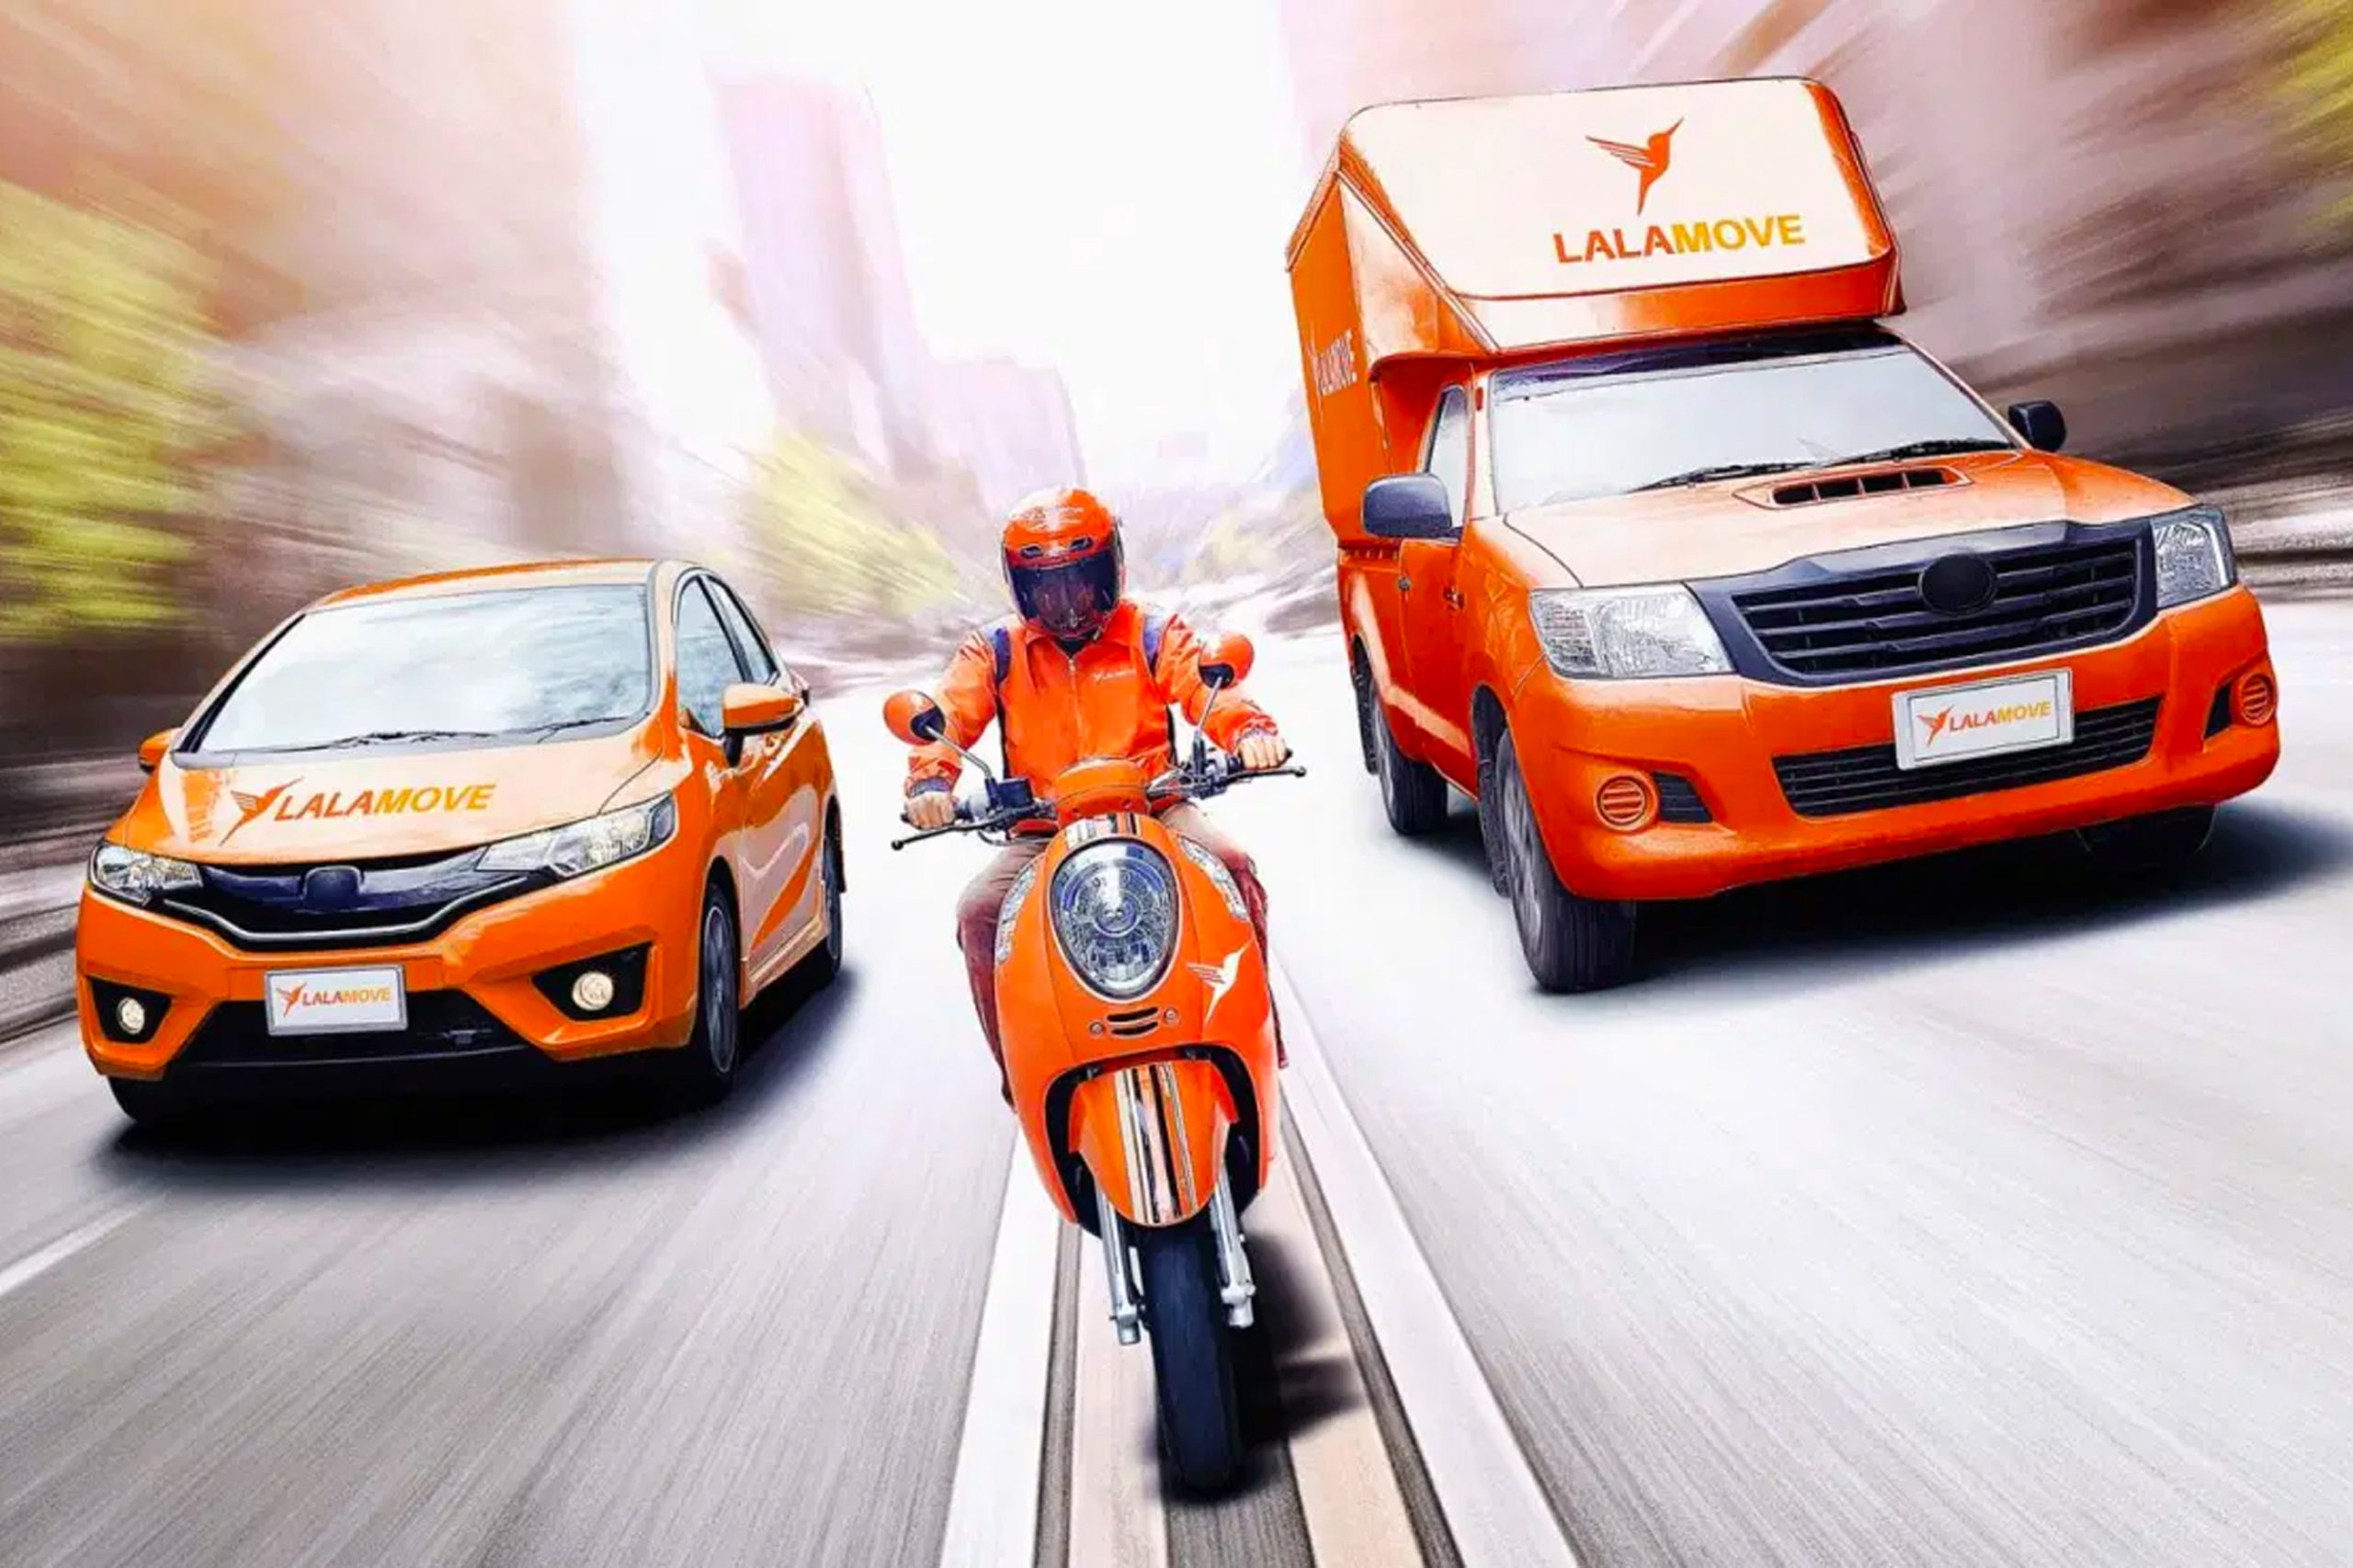 On-demand logistics firm Lalamove valued at USD 10 billion after new round